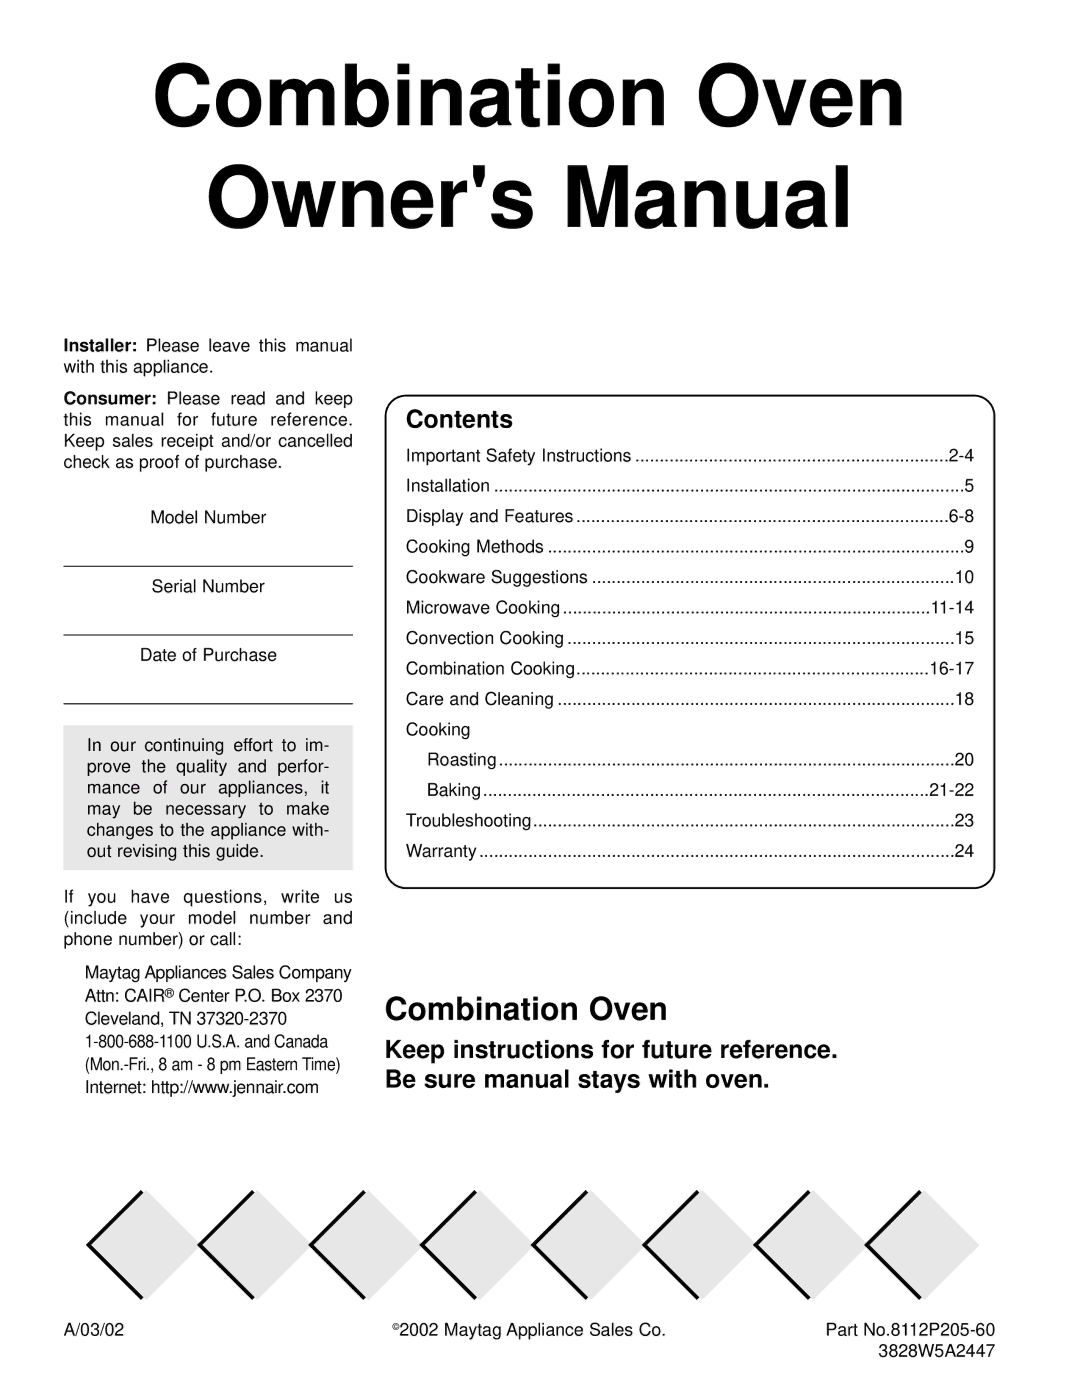 Maytag Combination Oven owner manual Contents 